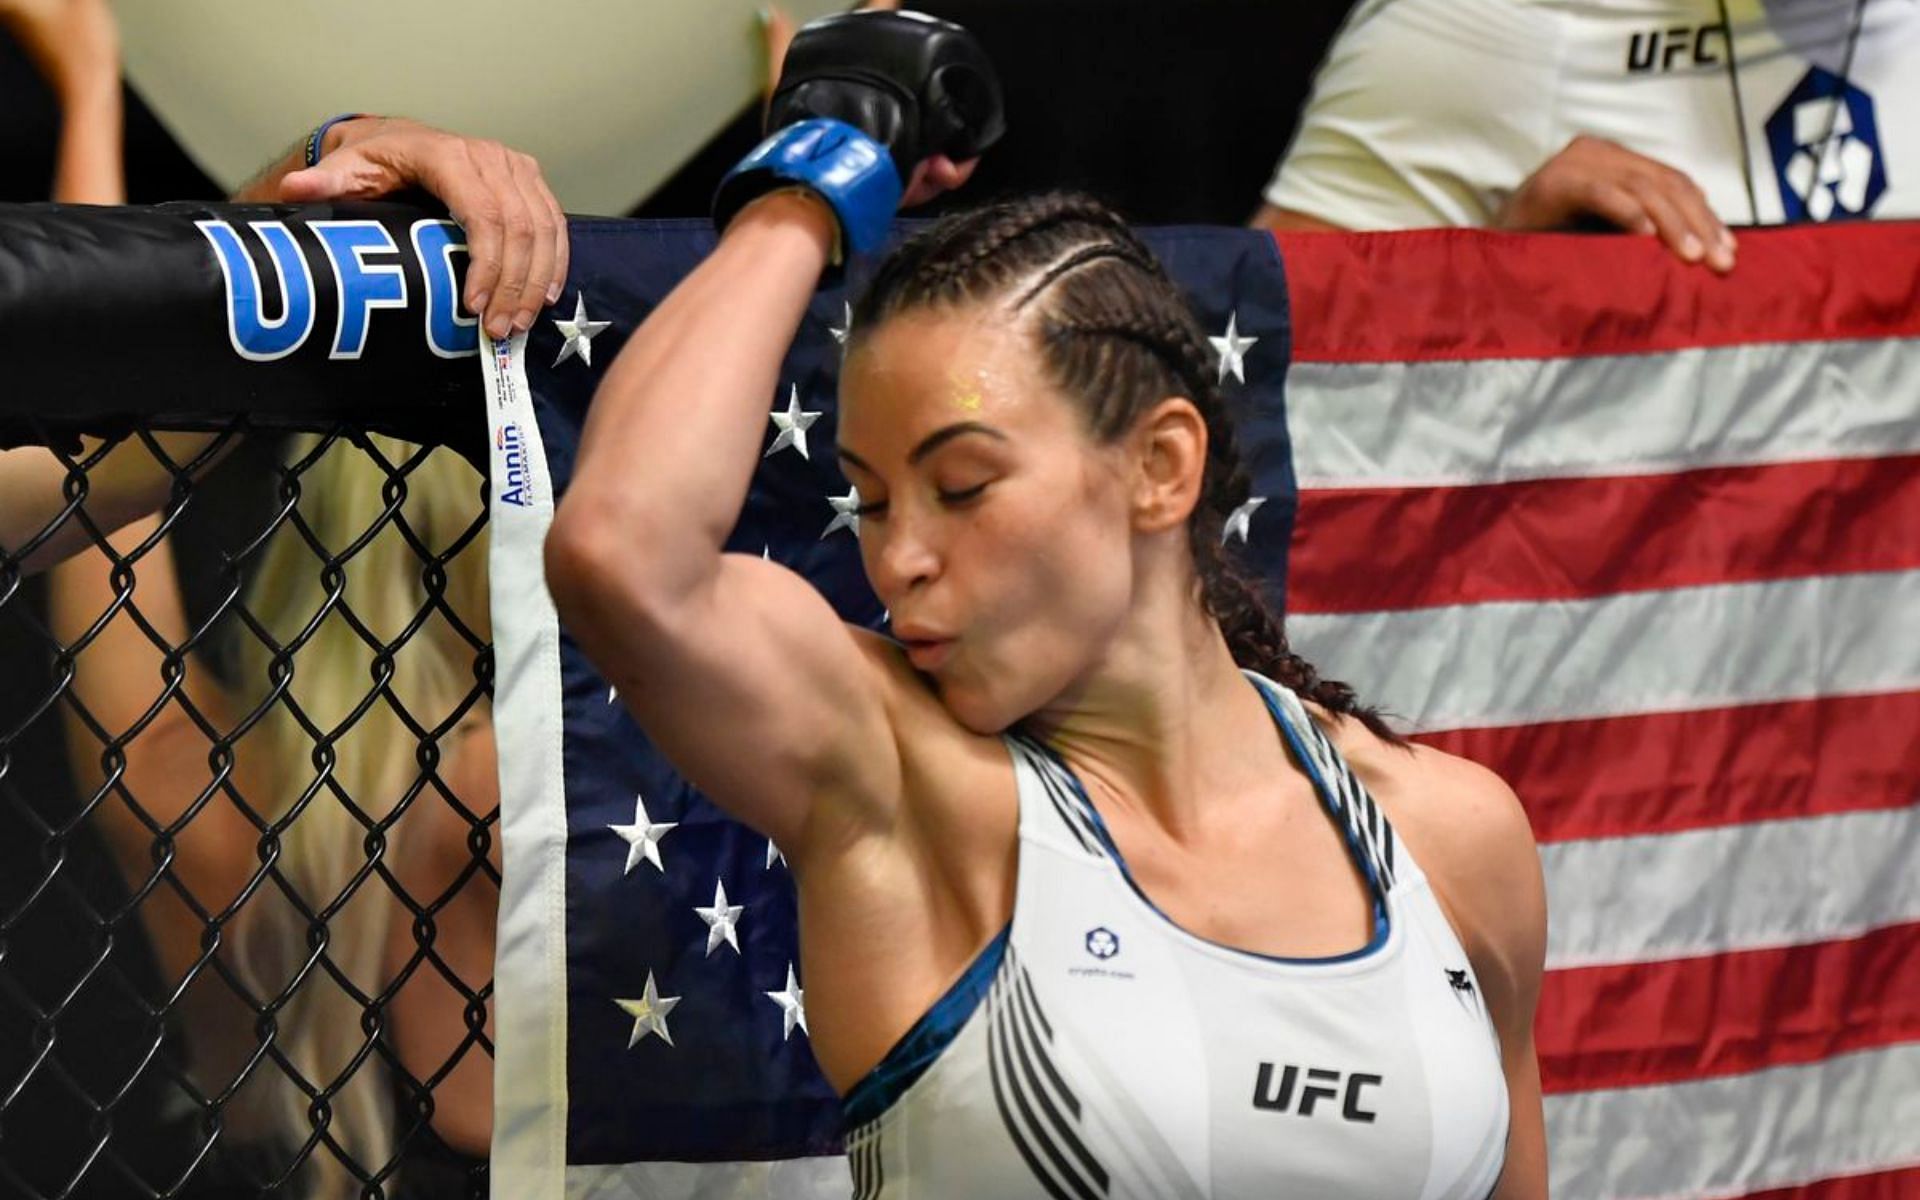 With Lauren Murphy now out of action, who could replace her against Miesha Tate at UFC 276?